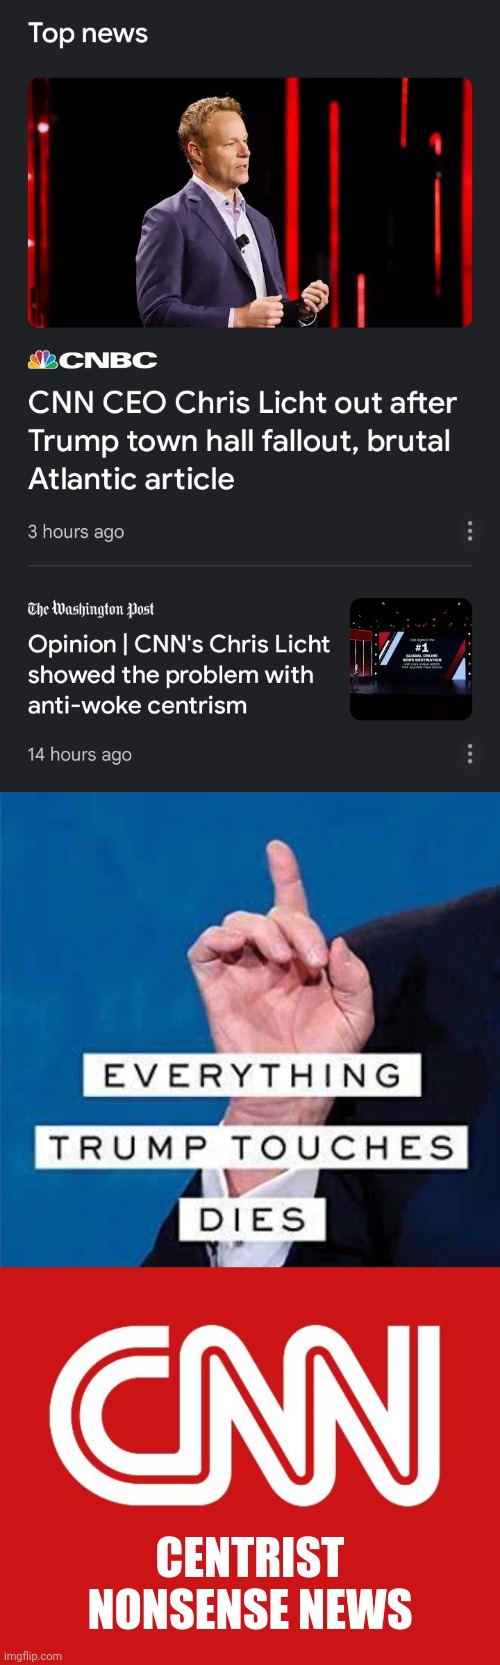 The awesome power of Centrism! | CENTRIST NONSENSE NEWS | image tagged in cnn,centrism,trump lies,chris licht,get woke,unbiased between truth and lies | made w/ Imgflip meme maker